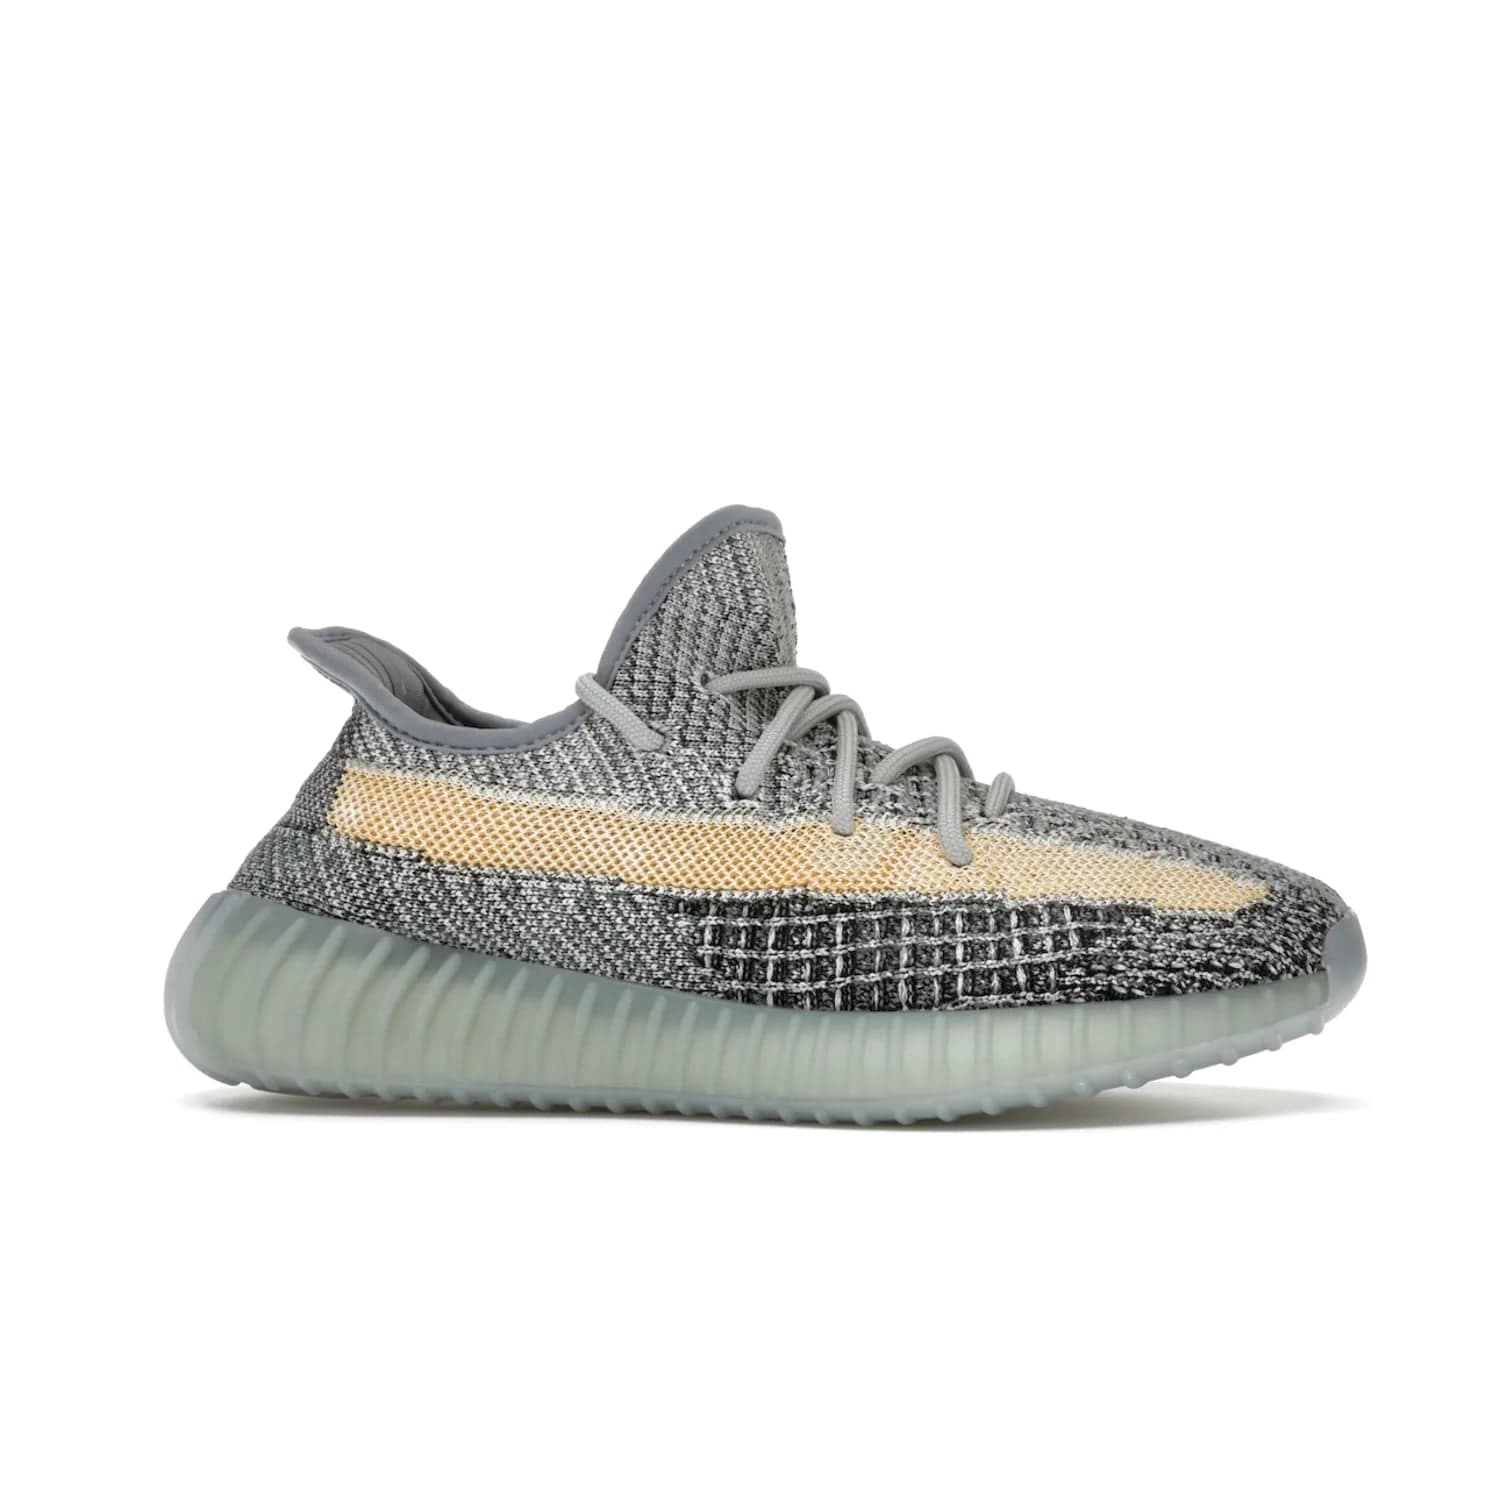 adidas Yeezy Boost 350 V2 Ash Blue - Image 2 - Only at www.BallersClubKickz.com - Must-have design made of engineered primeknit upper, comfortable sock-like upper and full-length Boost midsole, and semi-translucent rubber cage for added durability and style. The adidas Yeezy Boost 350 V2 Ash Blue blends timeless colors and comfort.